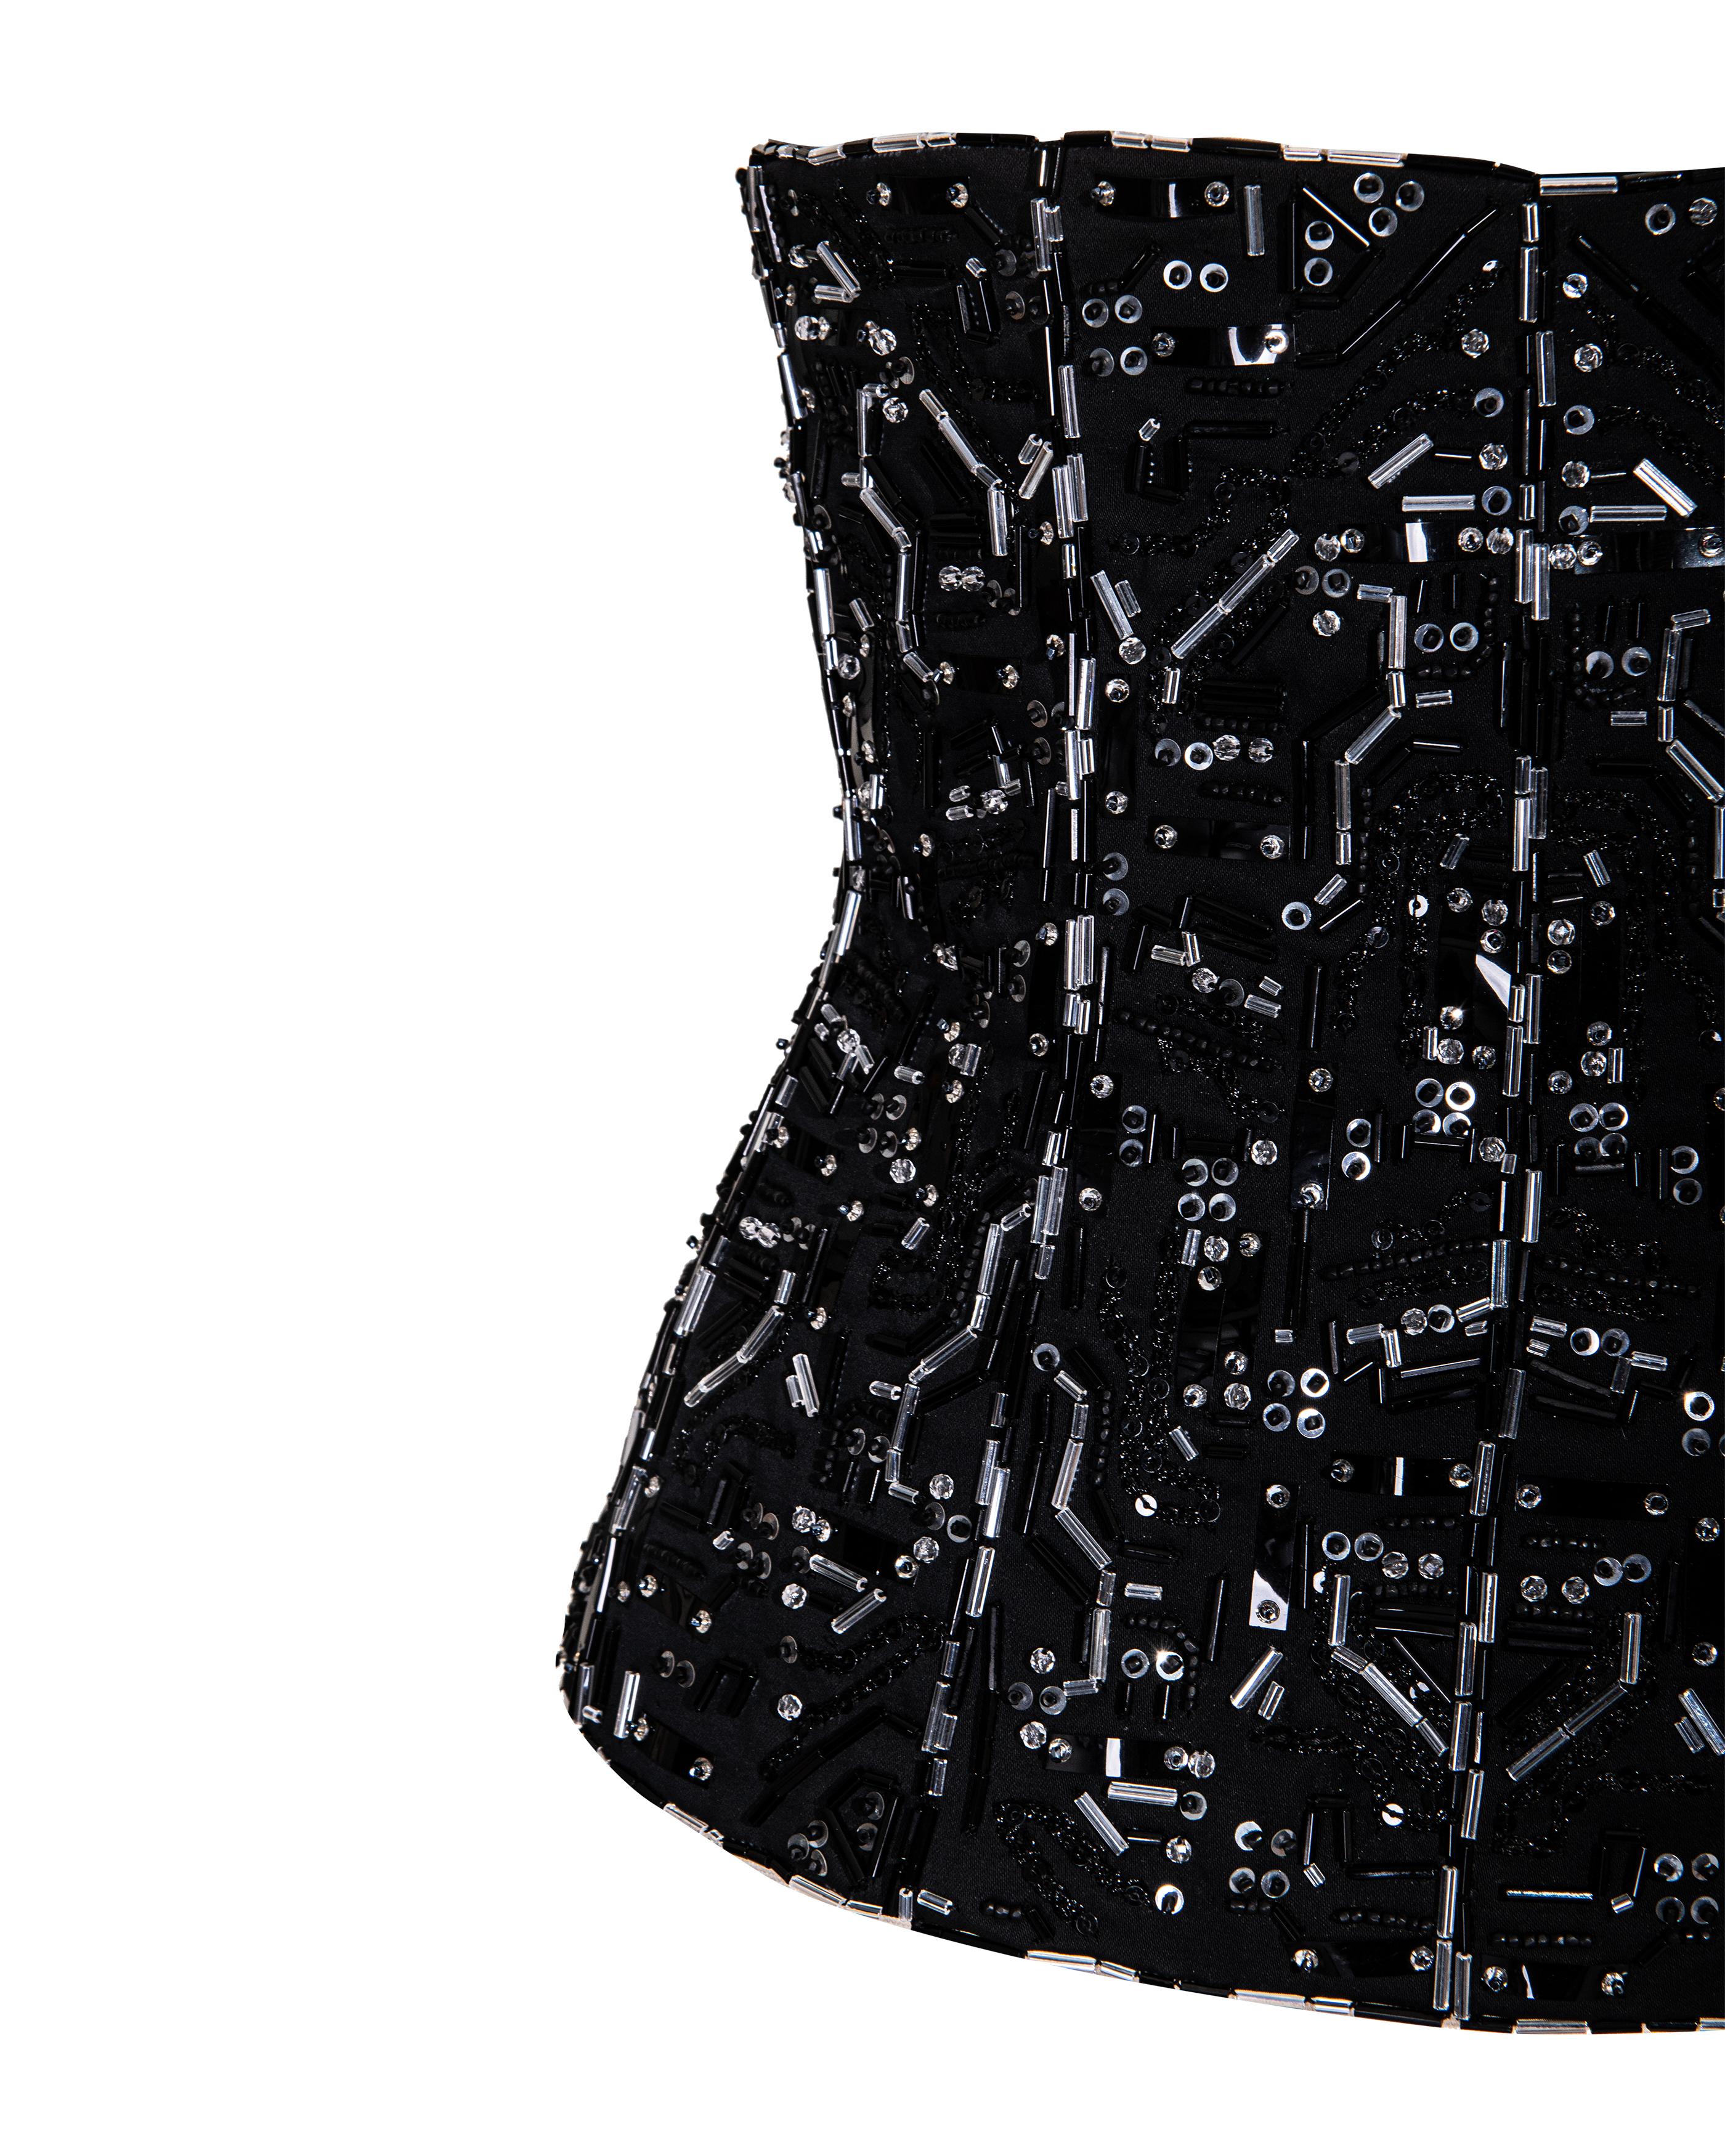 A/W 1999 Givenchy by Alexander McQueen Circuit Board Black Embellished Corset For Sale 3